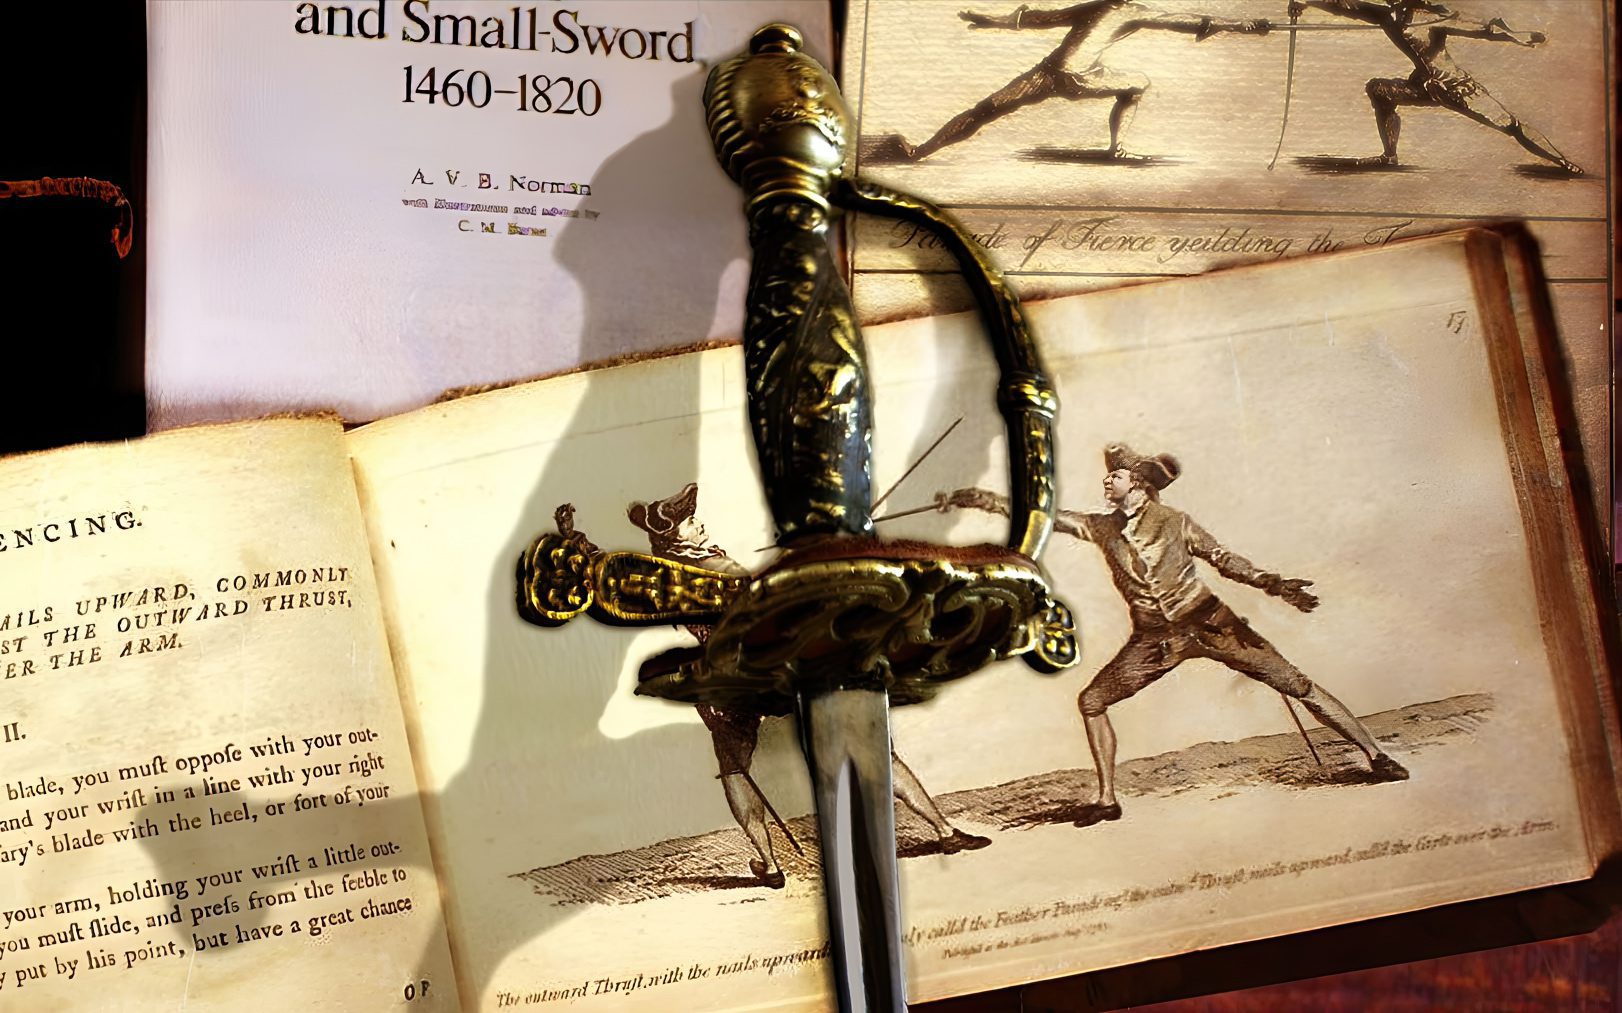 The Small Sword: A “Needle of Death” or a Decorative Piece?